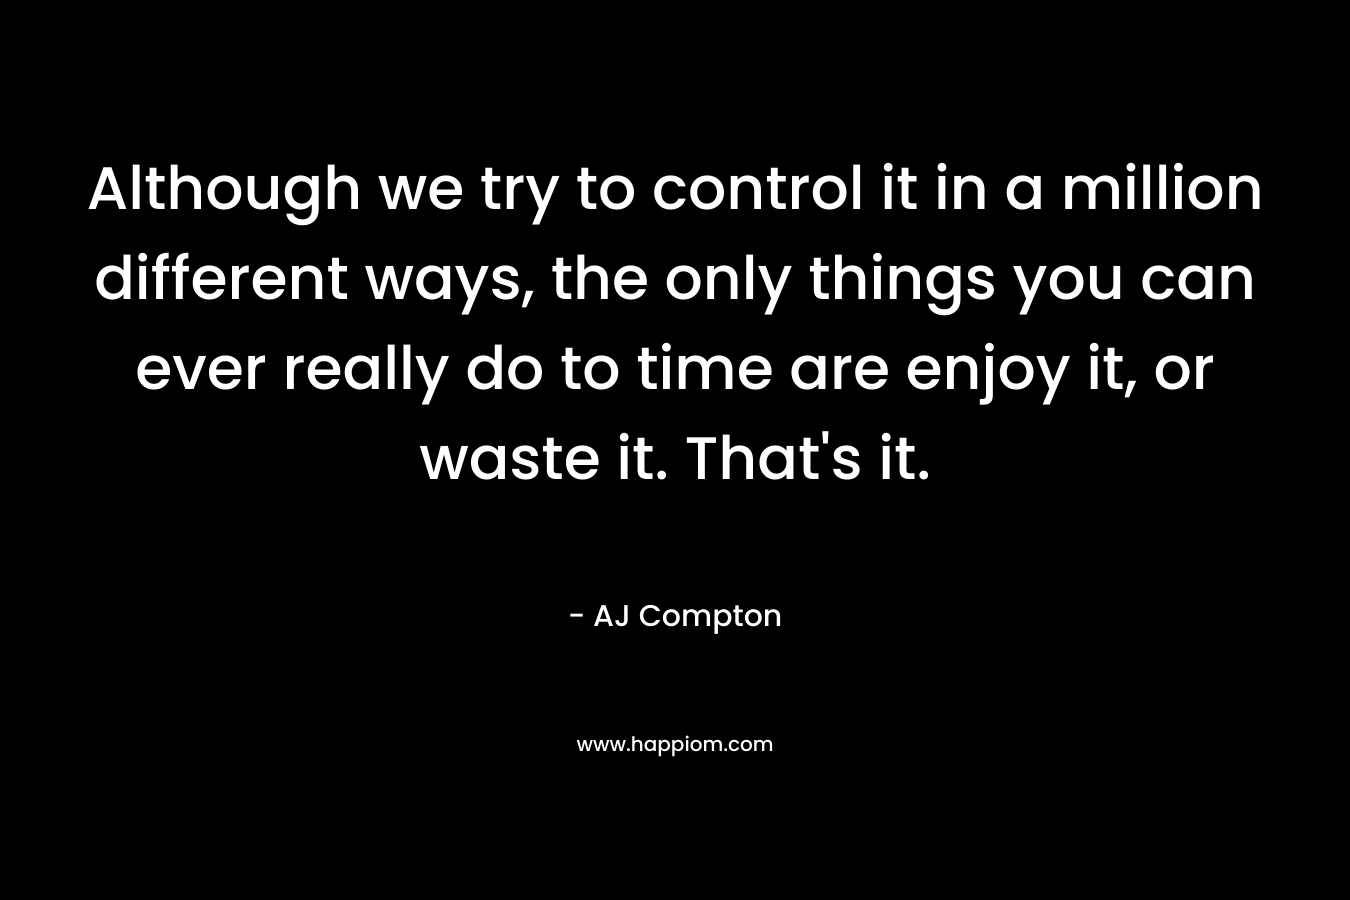 Although we try to control it in a million different ways, the only things you can ever really do to time are enjoy it, or waste it. That’s it. – AJ Compton